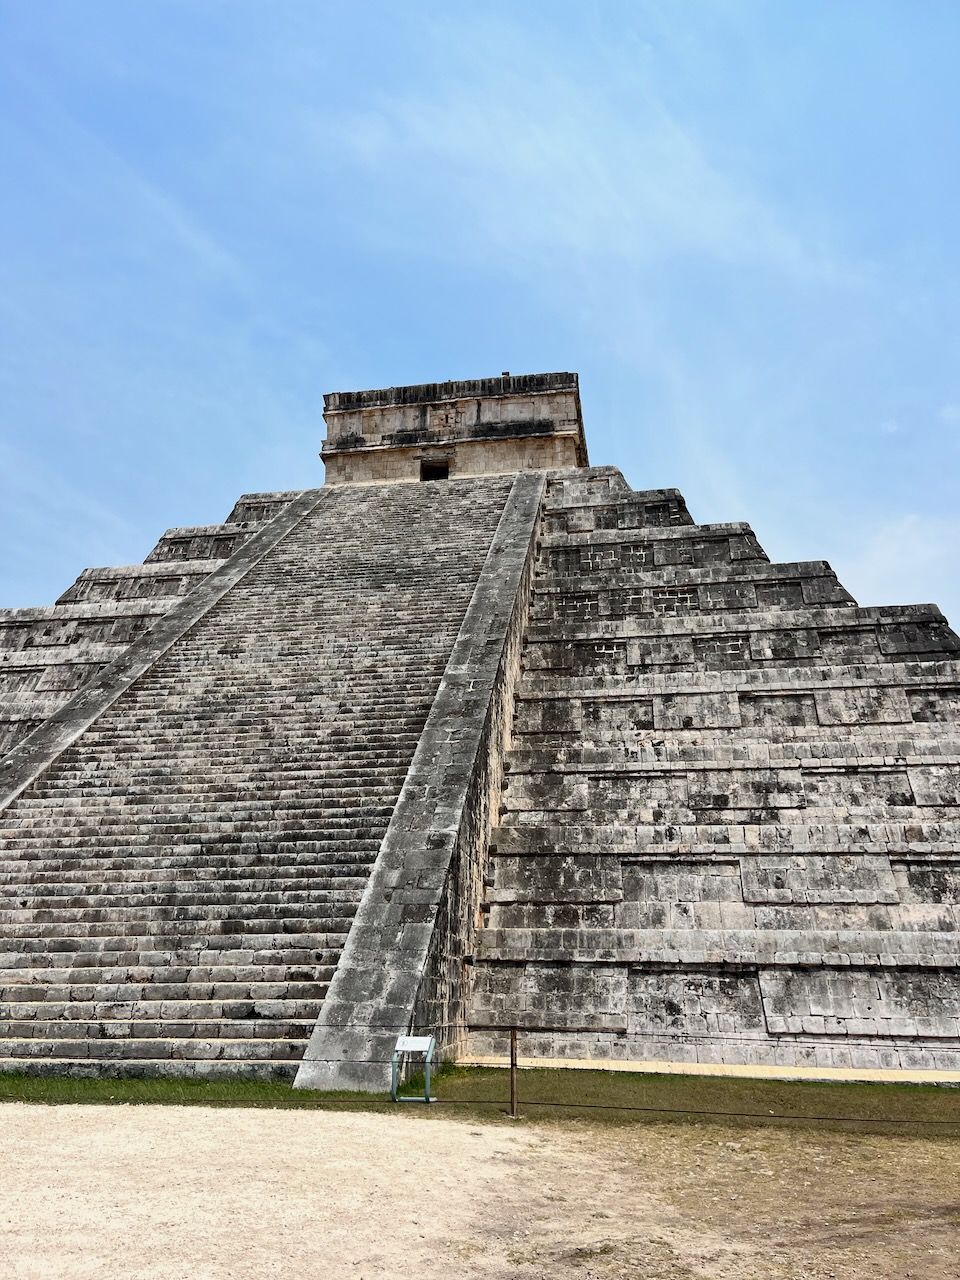 The largest temple at Chichen Itza